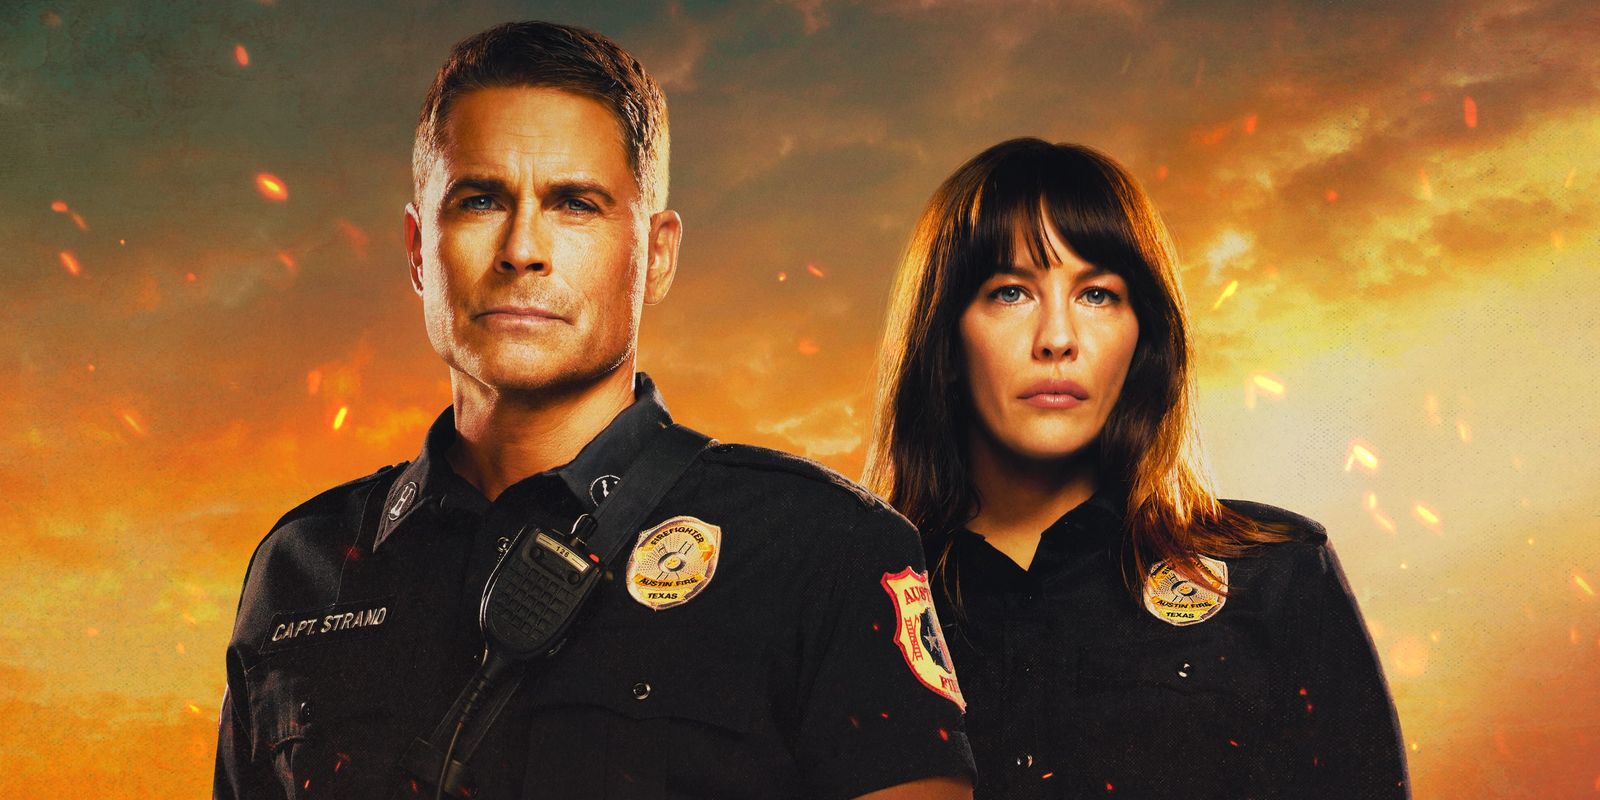 Owen and Michelle on a promo photo for 9-1-1 Lone Star